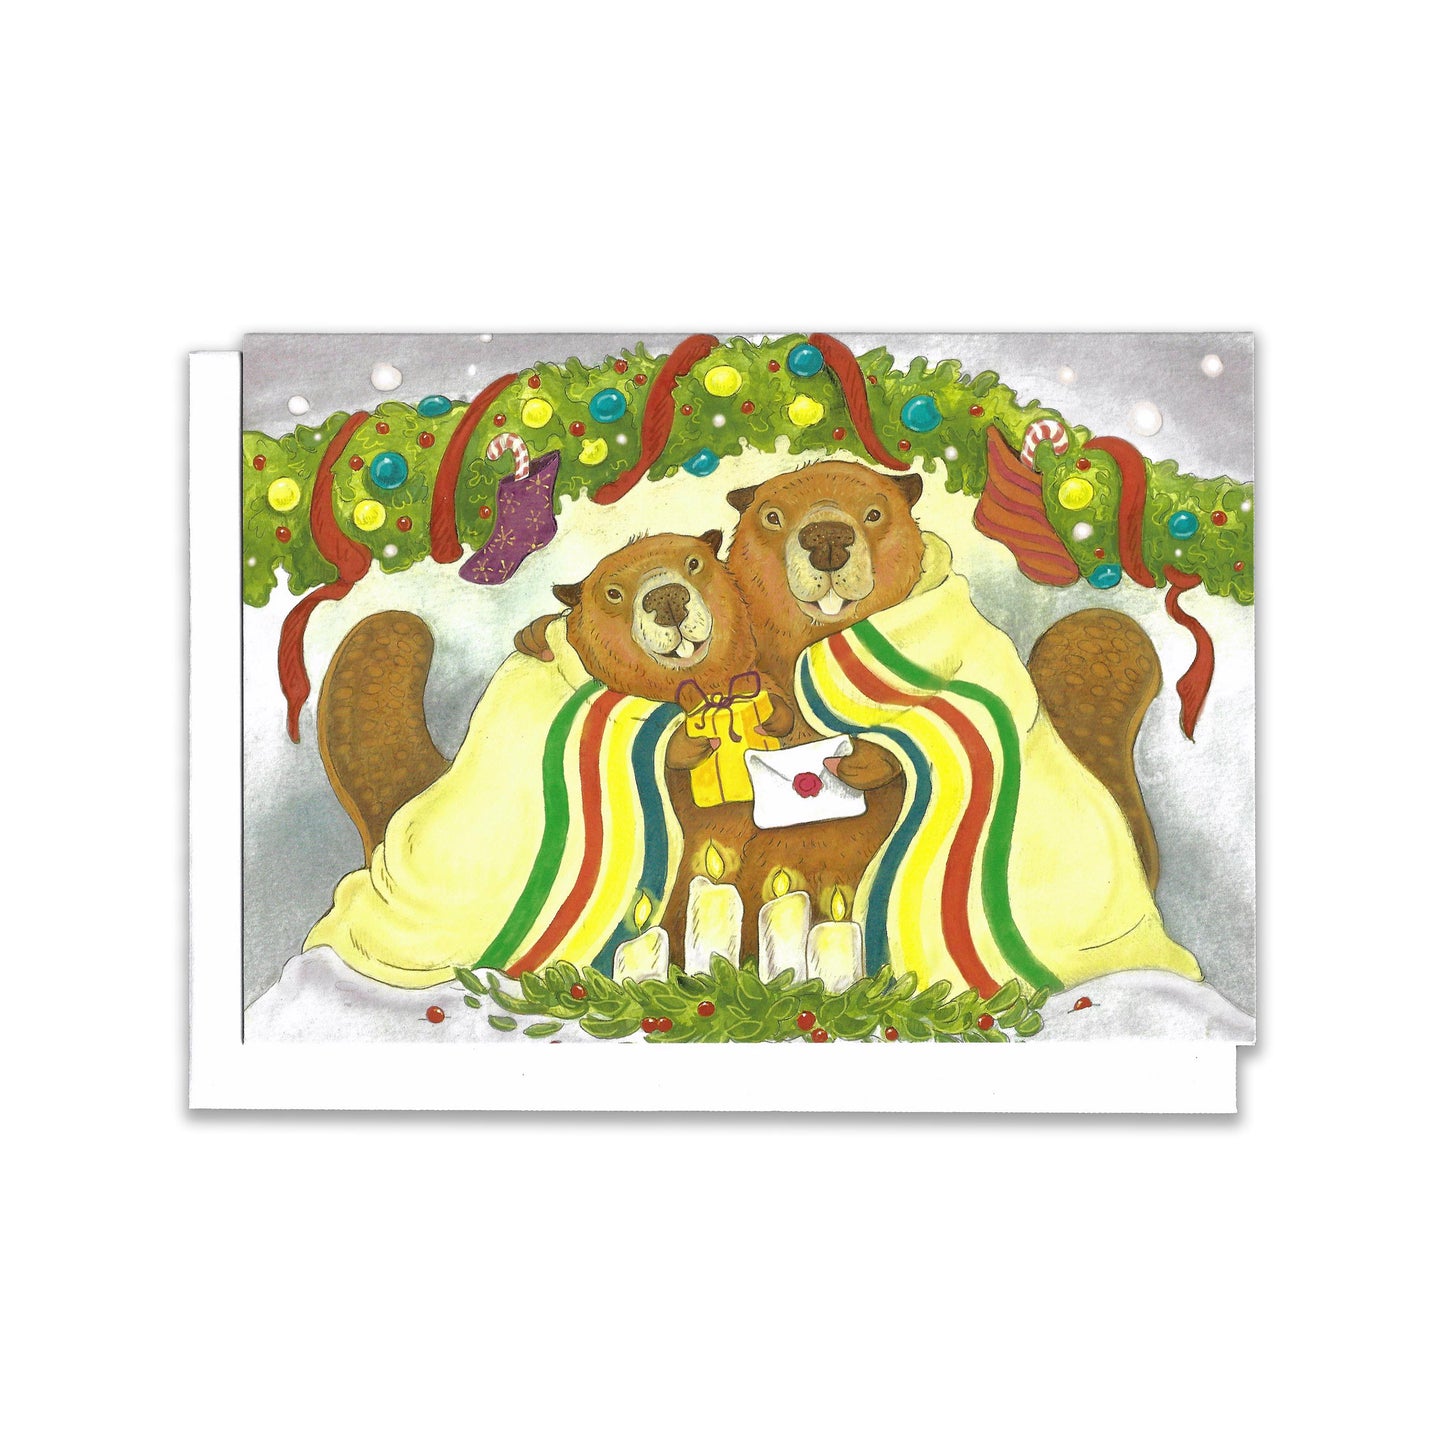 Illustrated greeting card of two beavers holding gifts. Hudson Bay blanket drapes over them